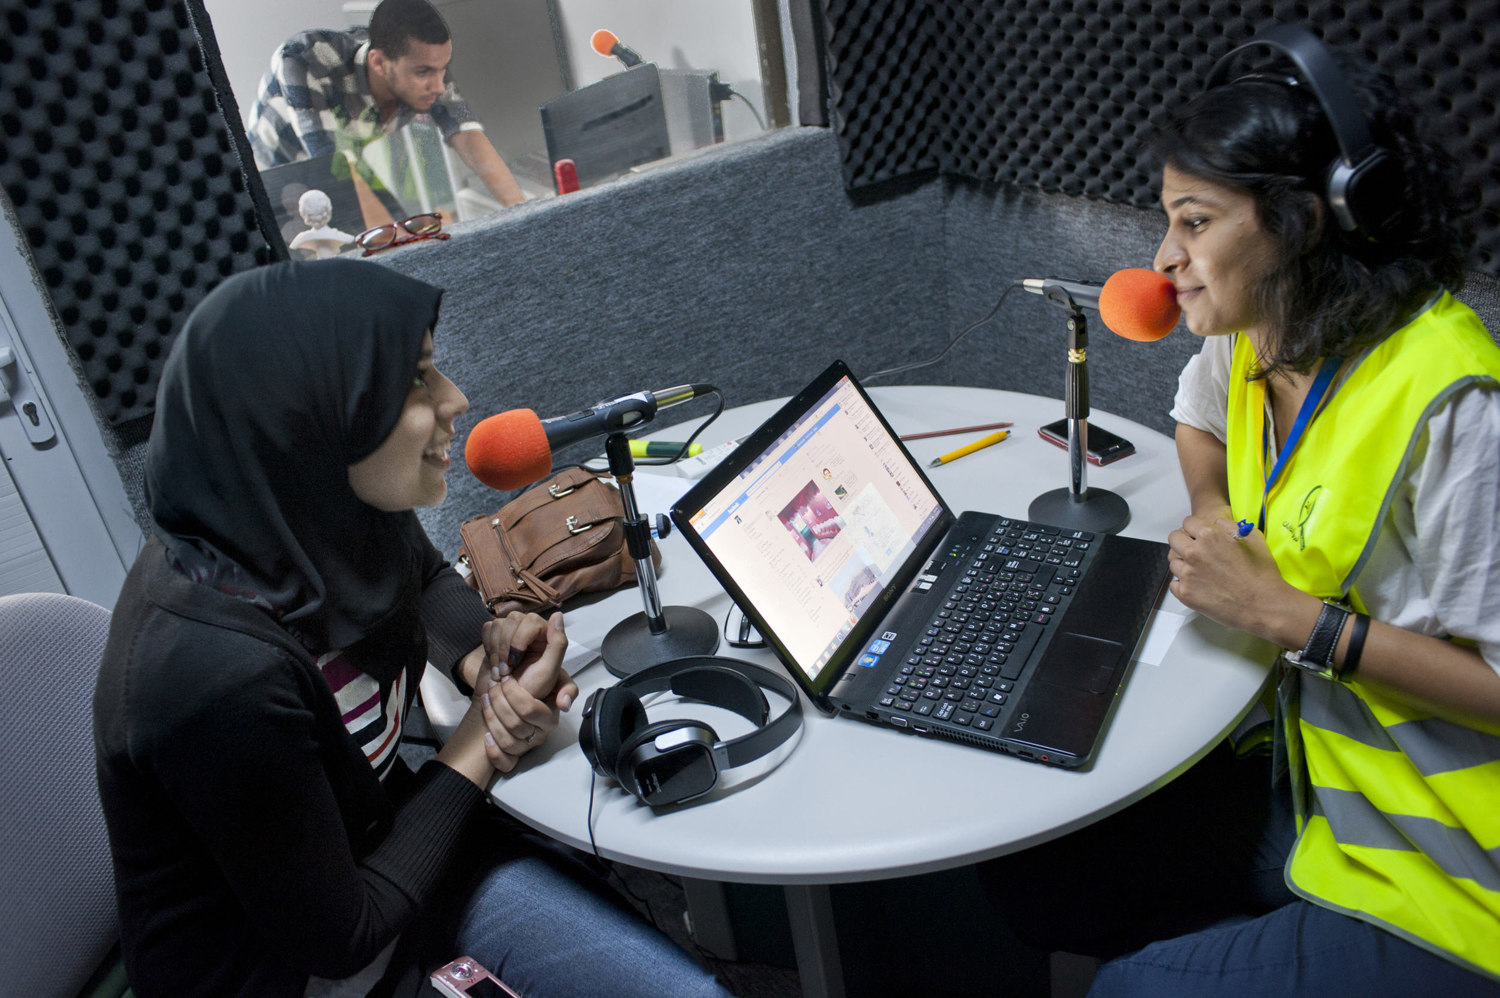  Radio host Ayo interviews Issraa Murabit after she voted on July 7th, 2012 in one of Tripoli's english language stations Tripoli FM. After 42 years of Muammar Gaddafi's reign, Libyans are participating in the first democratic election since 1969.  